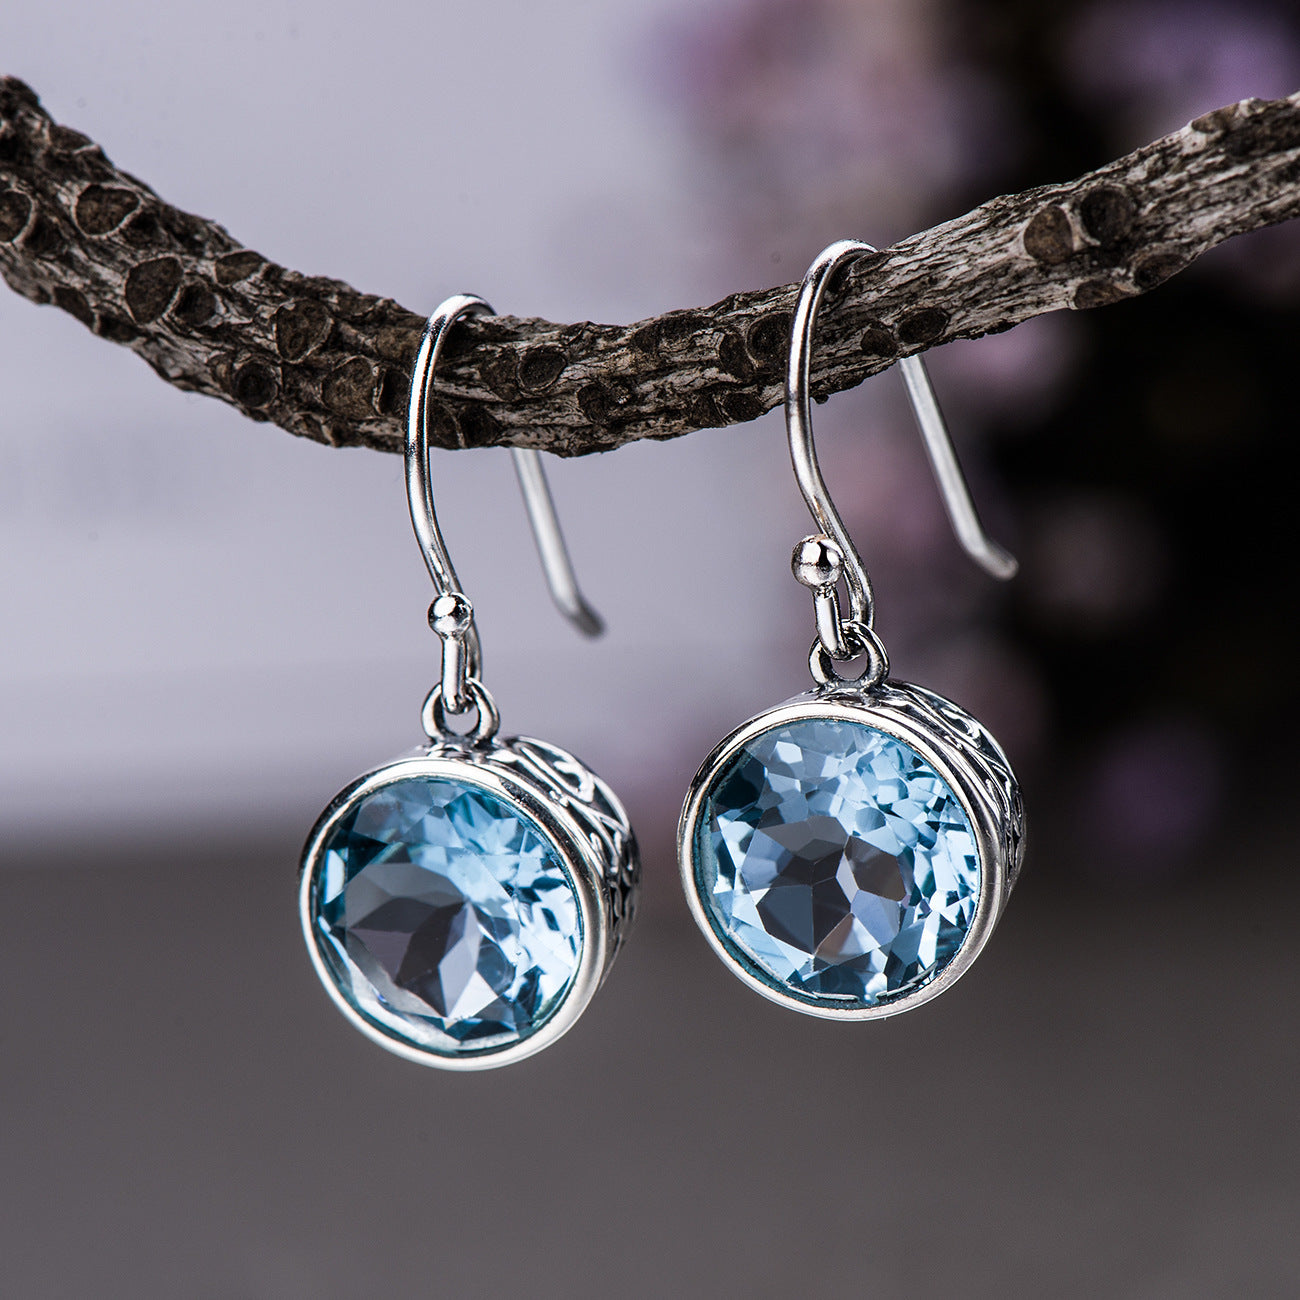 Unique 925 Sterling Silver Round Natural Blue Topaz Gemstone Pendant Drop Earrings